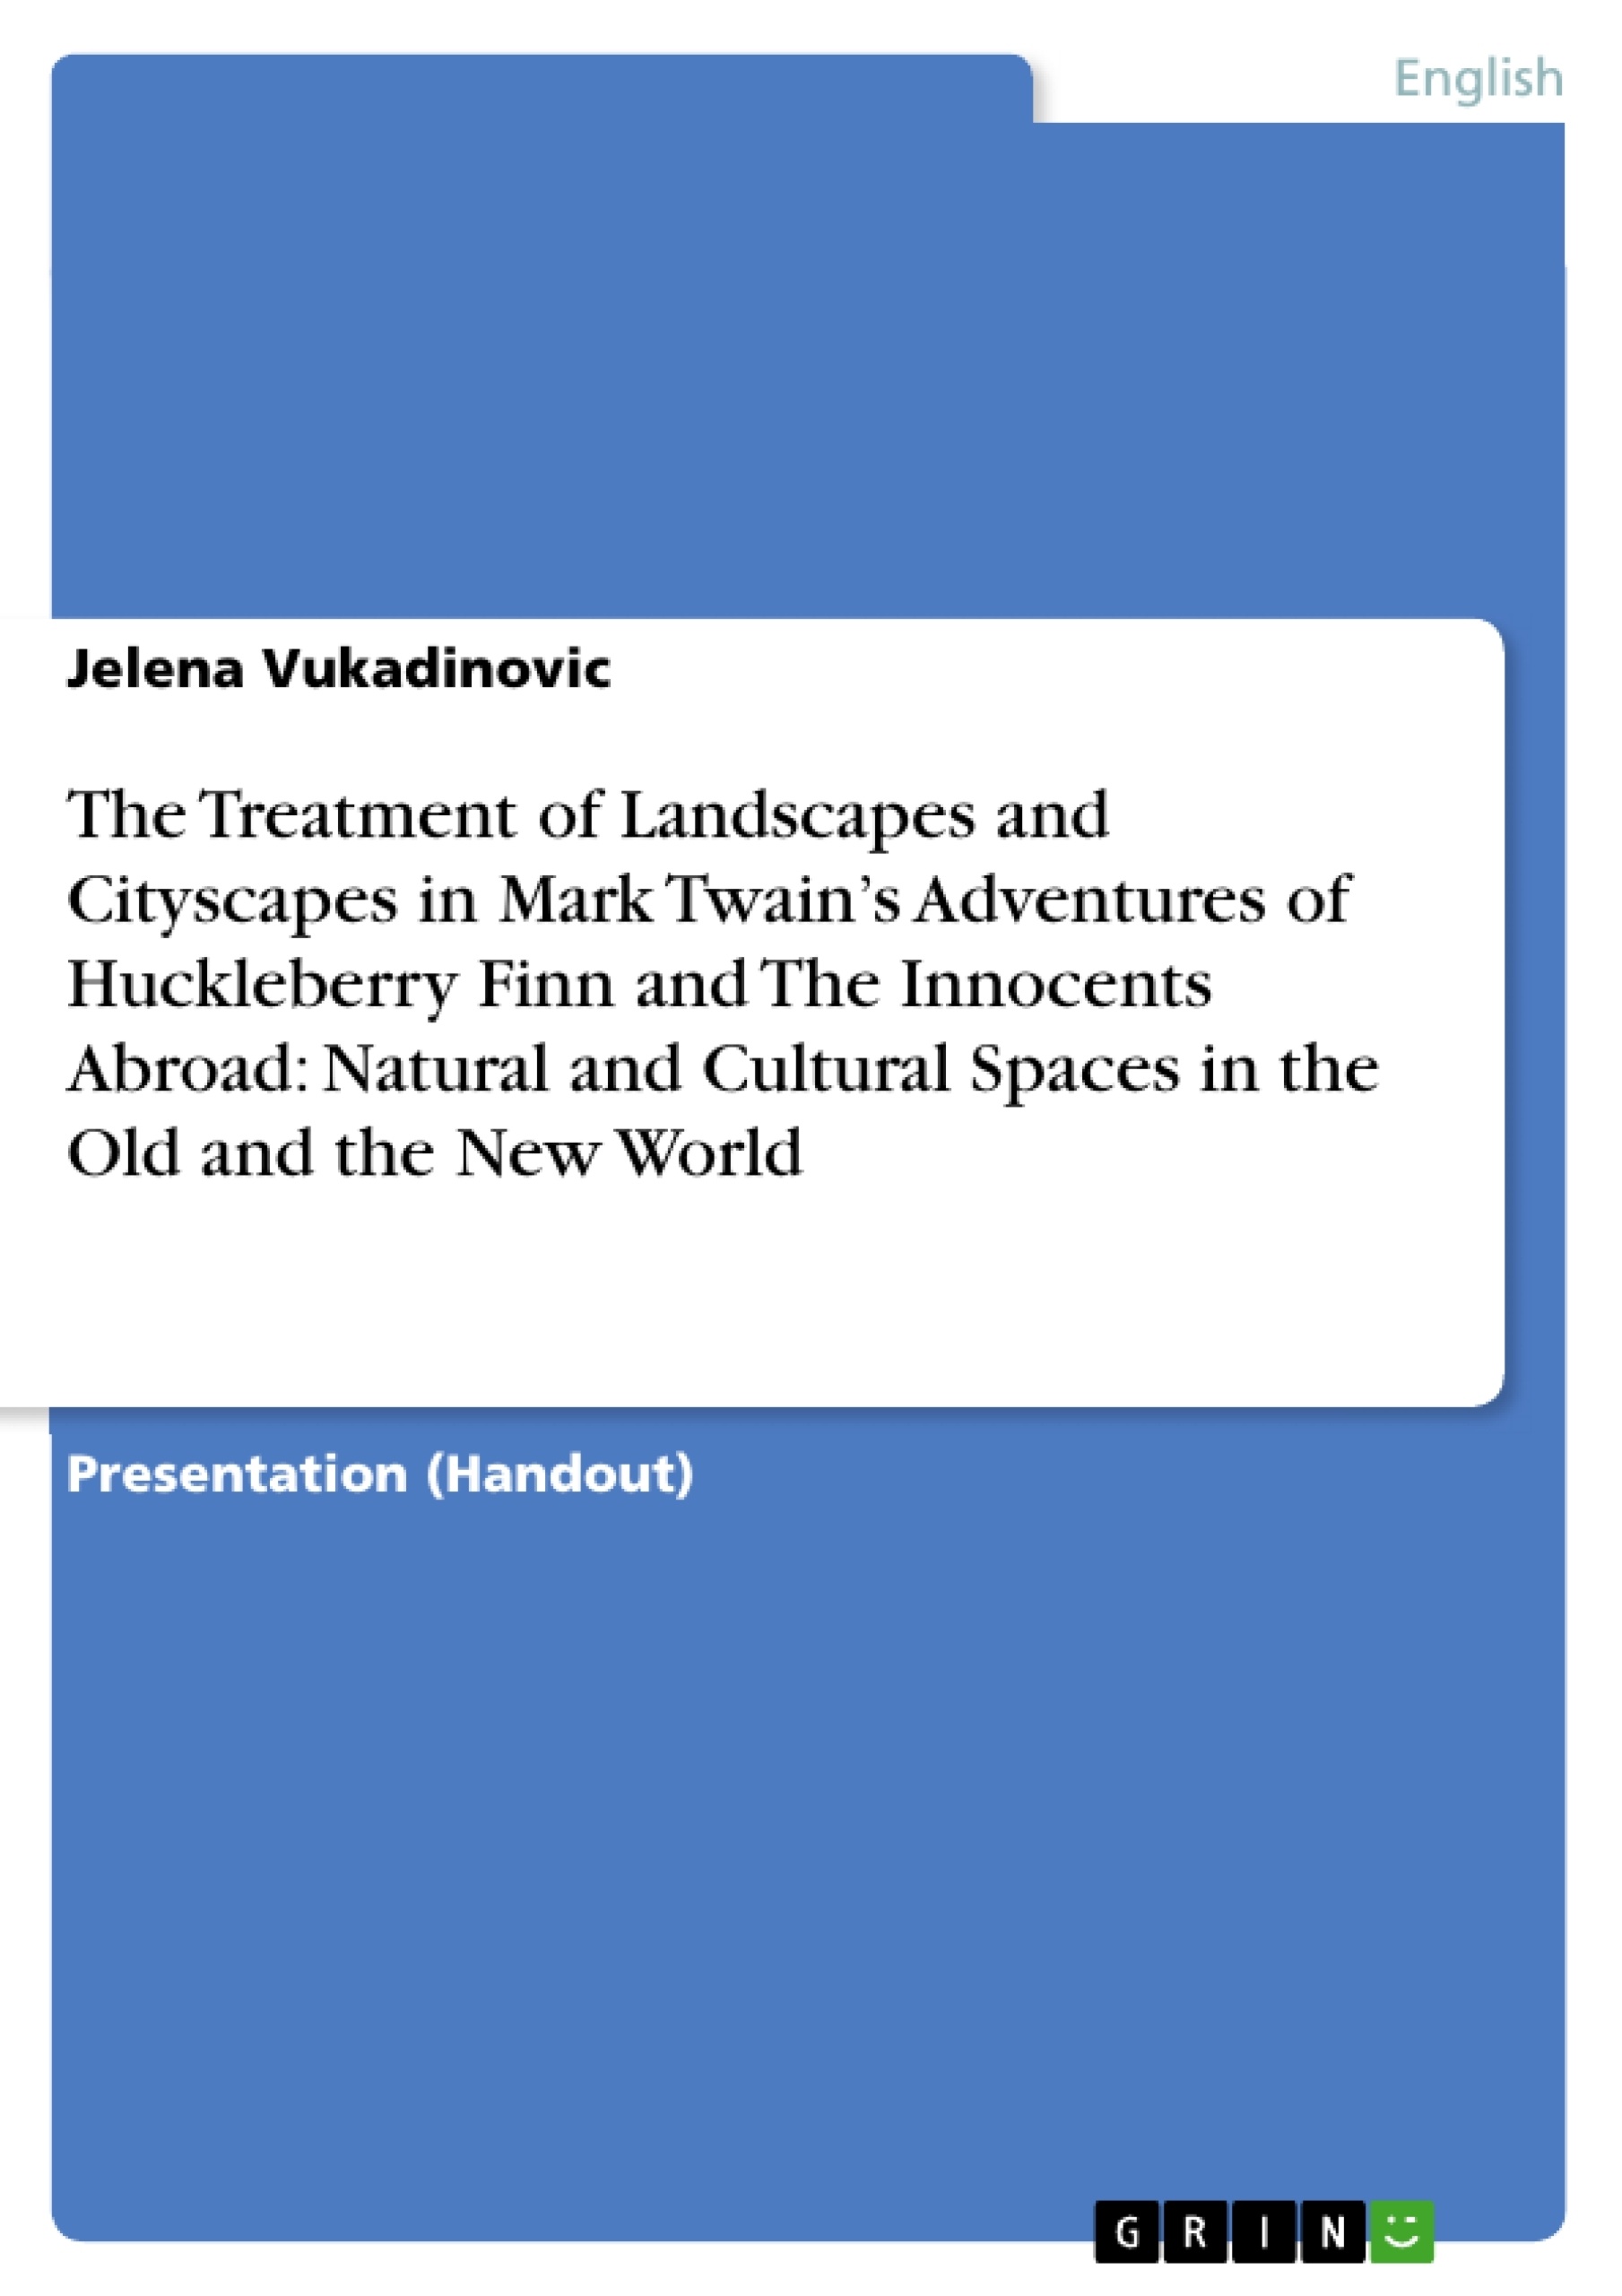 Título: The Treatment of Landscapes and Cityscapes in Mark Twain’s Adventures of Huckleberry Finn and The Innocents Abroad: Natural and Cultural Spaces in the Old and the New World